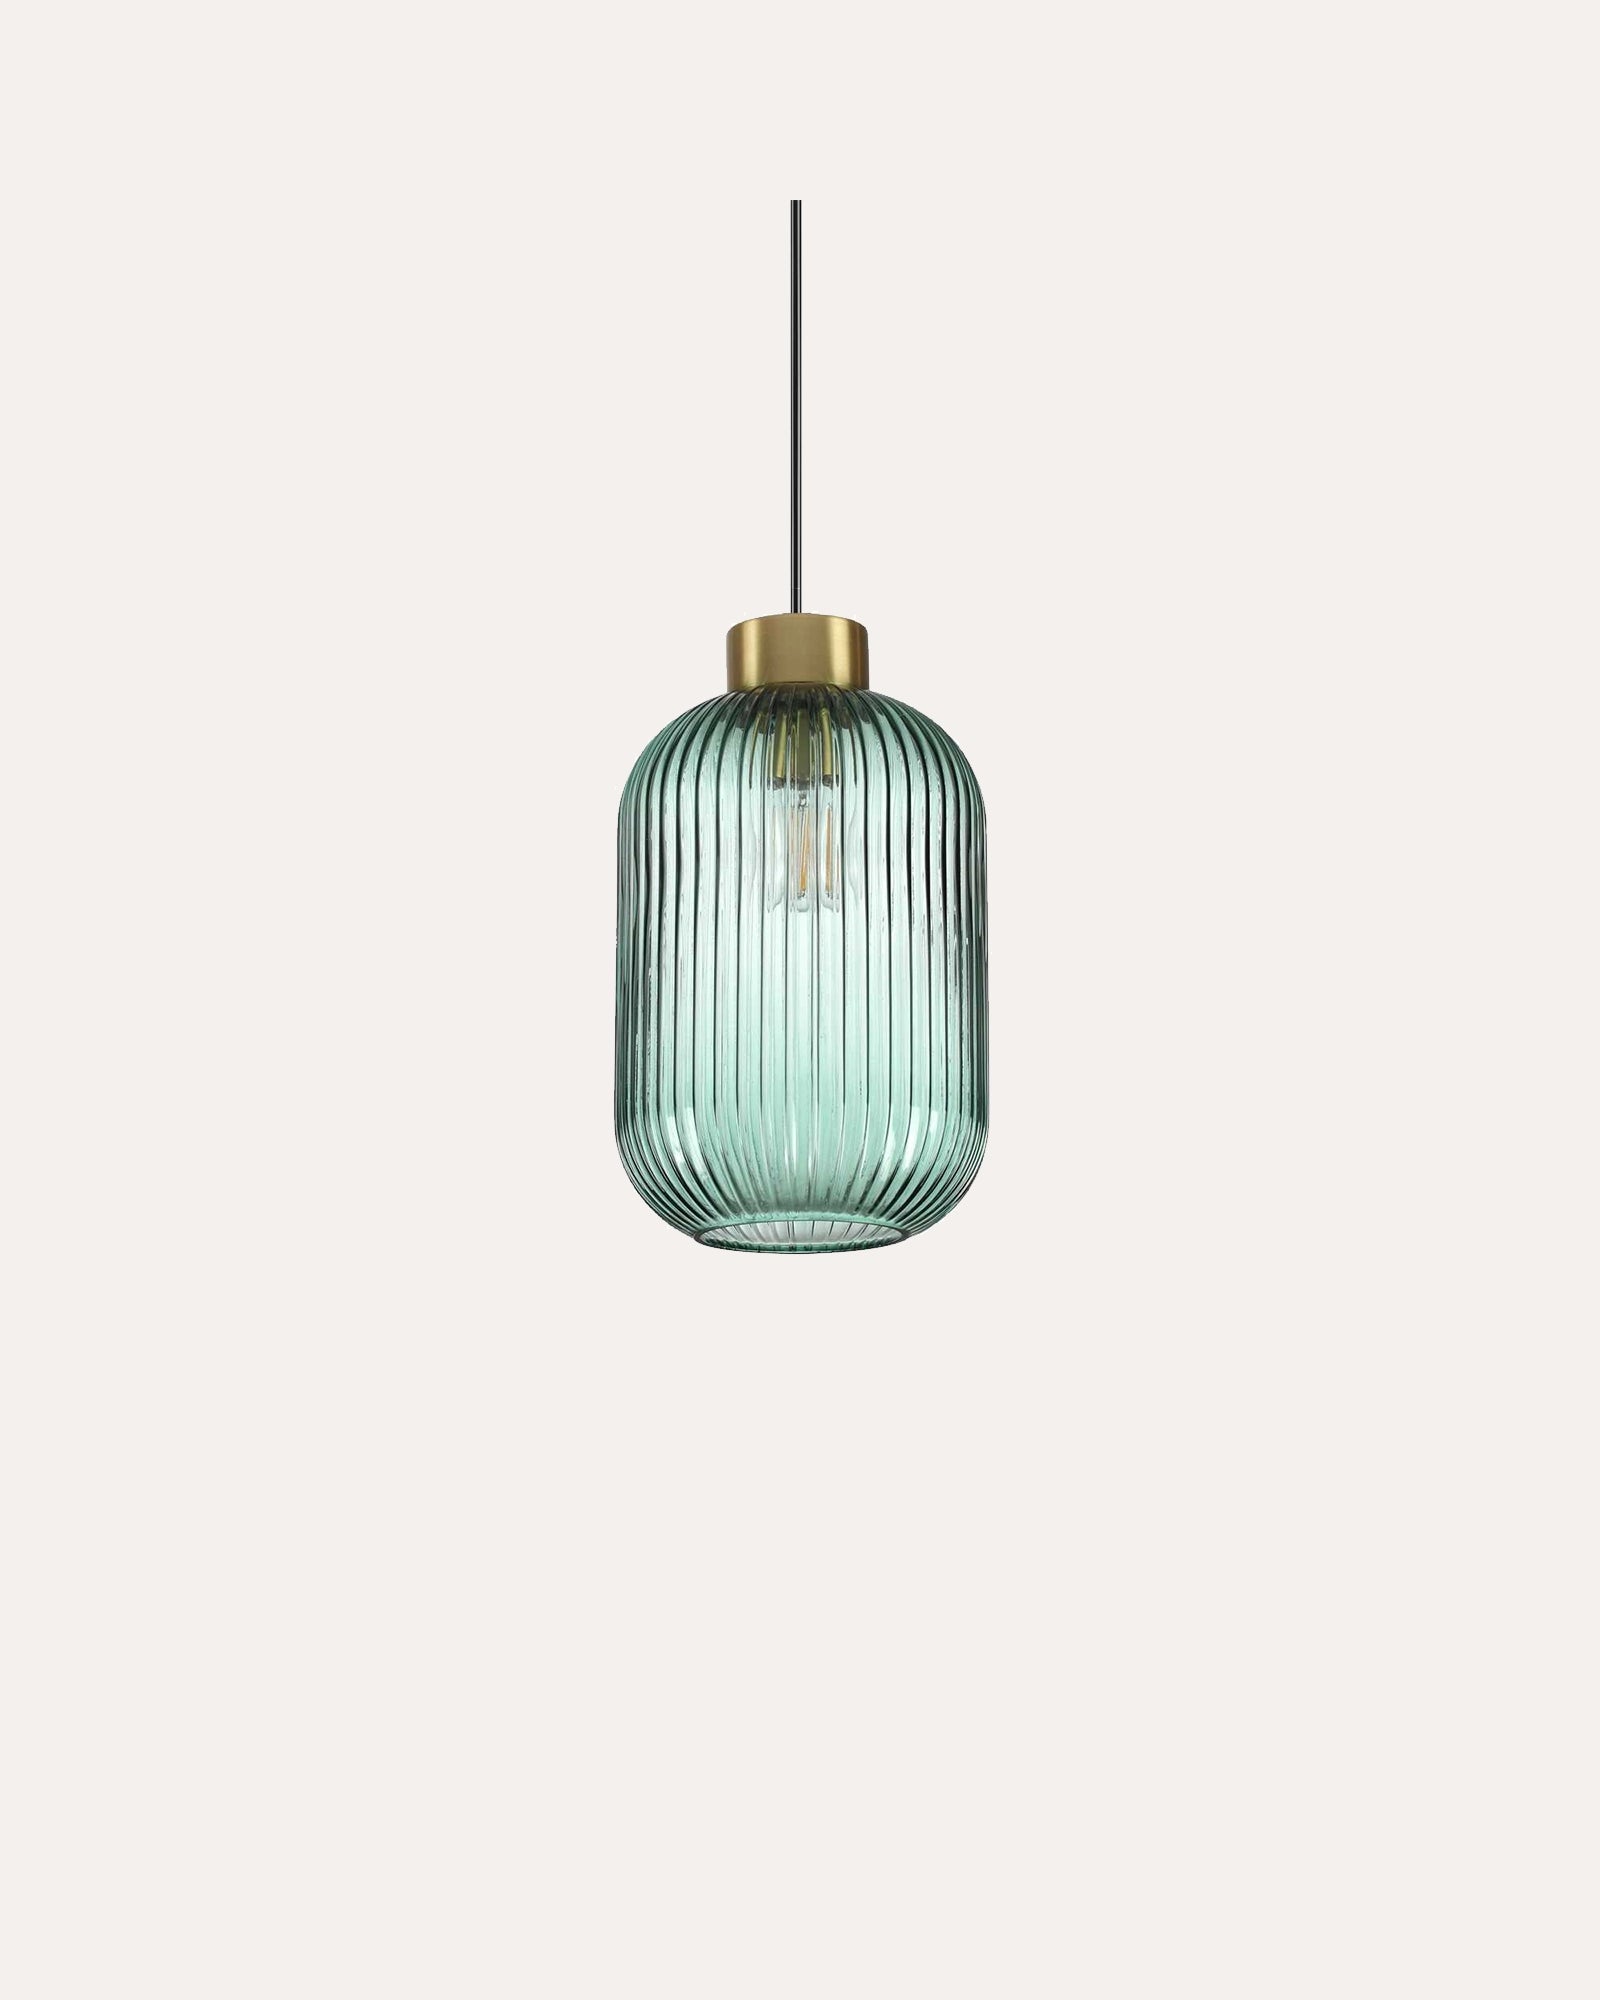 Small Mint Pendant Light in Green by Ideal Lux Lighting at Nook Collections